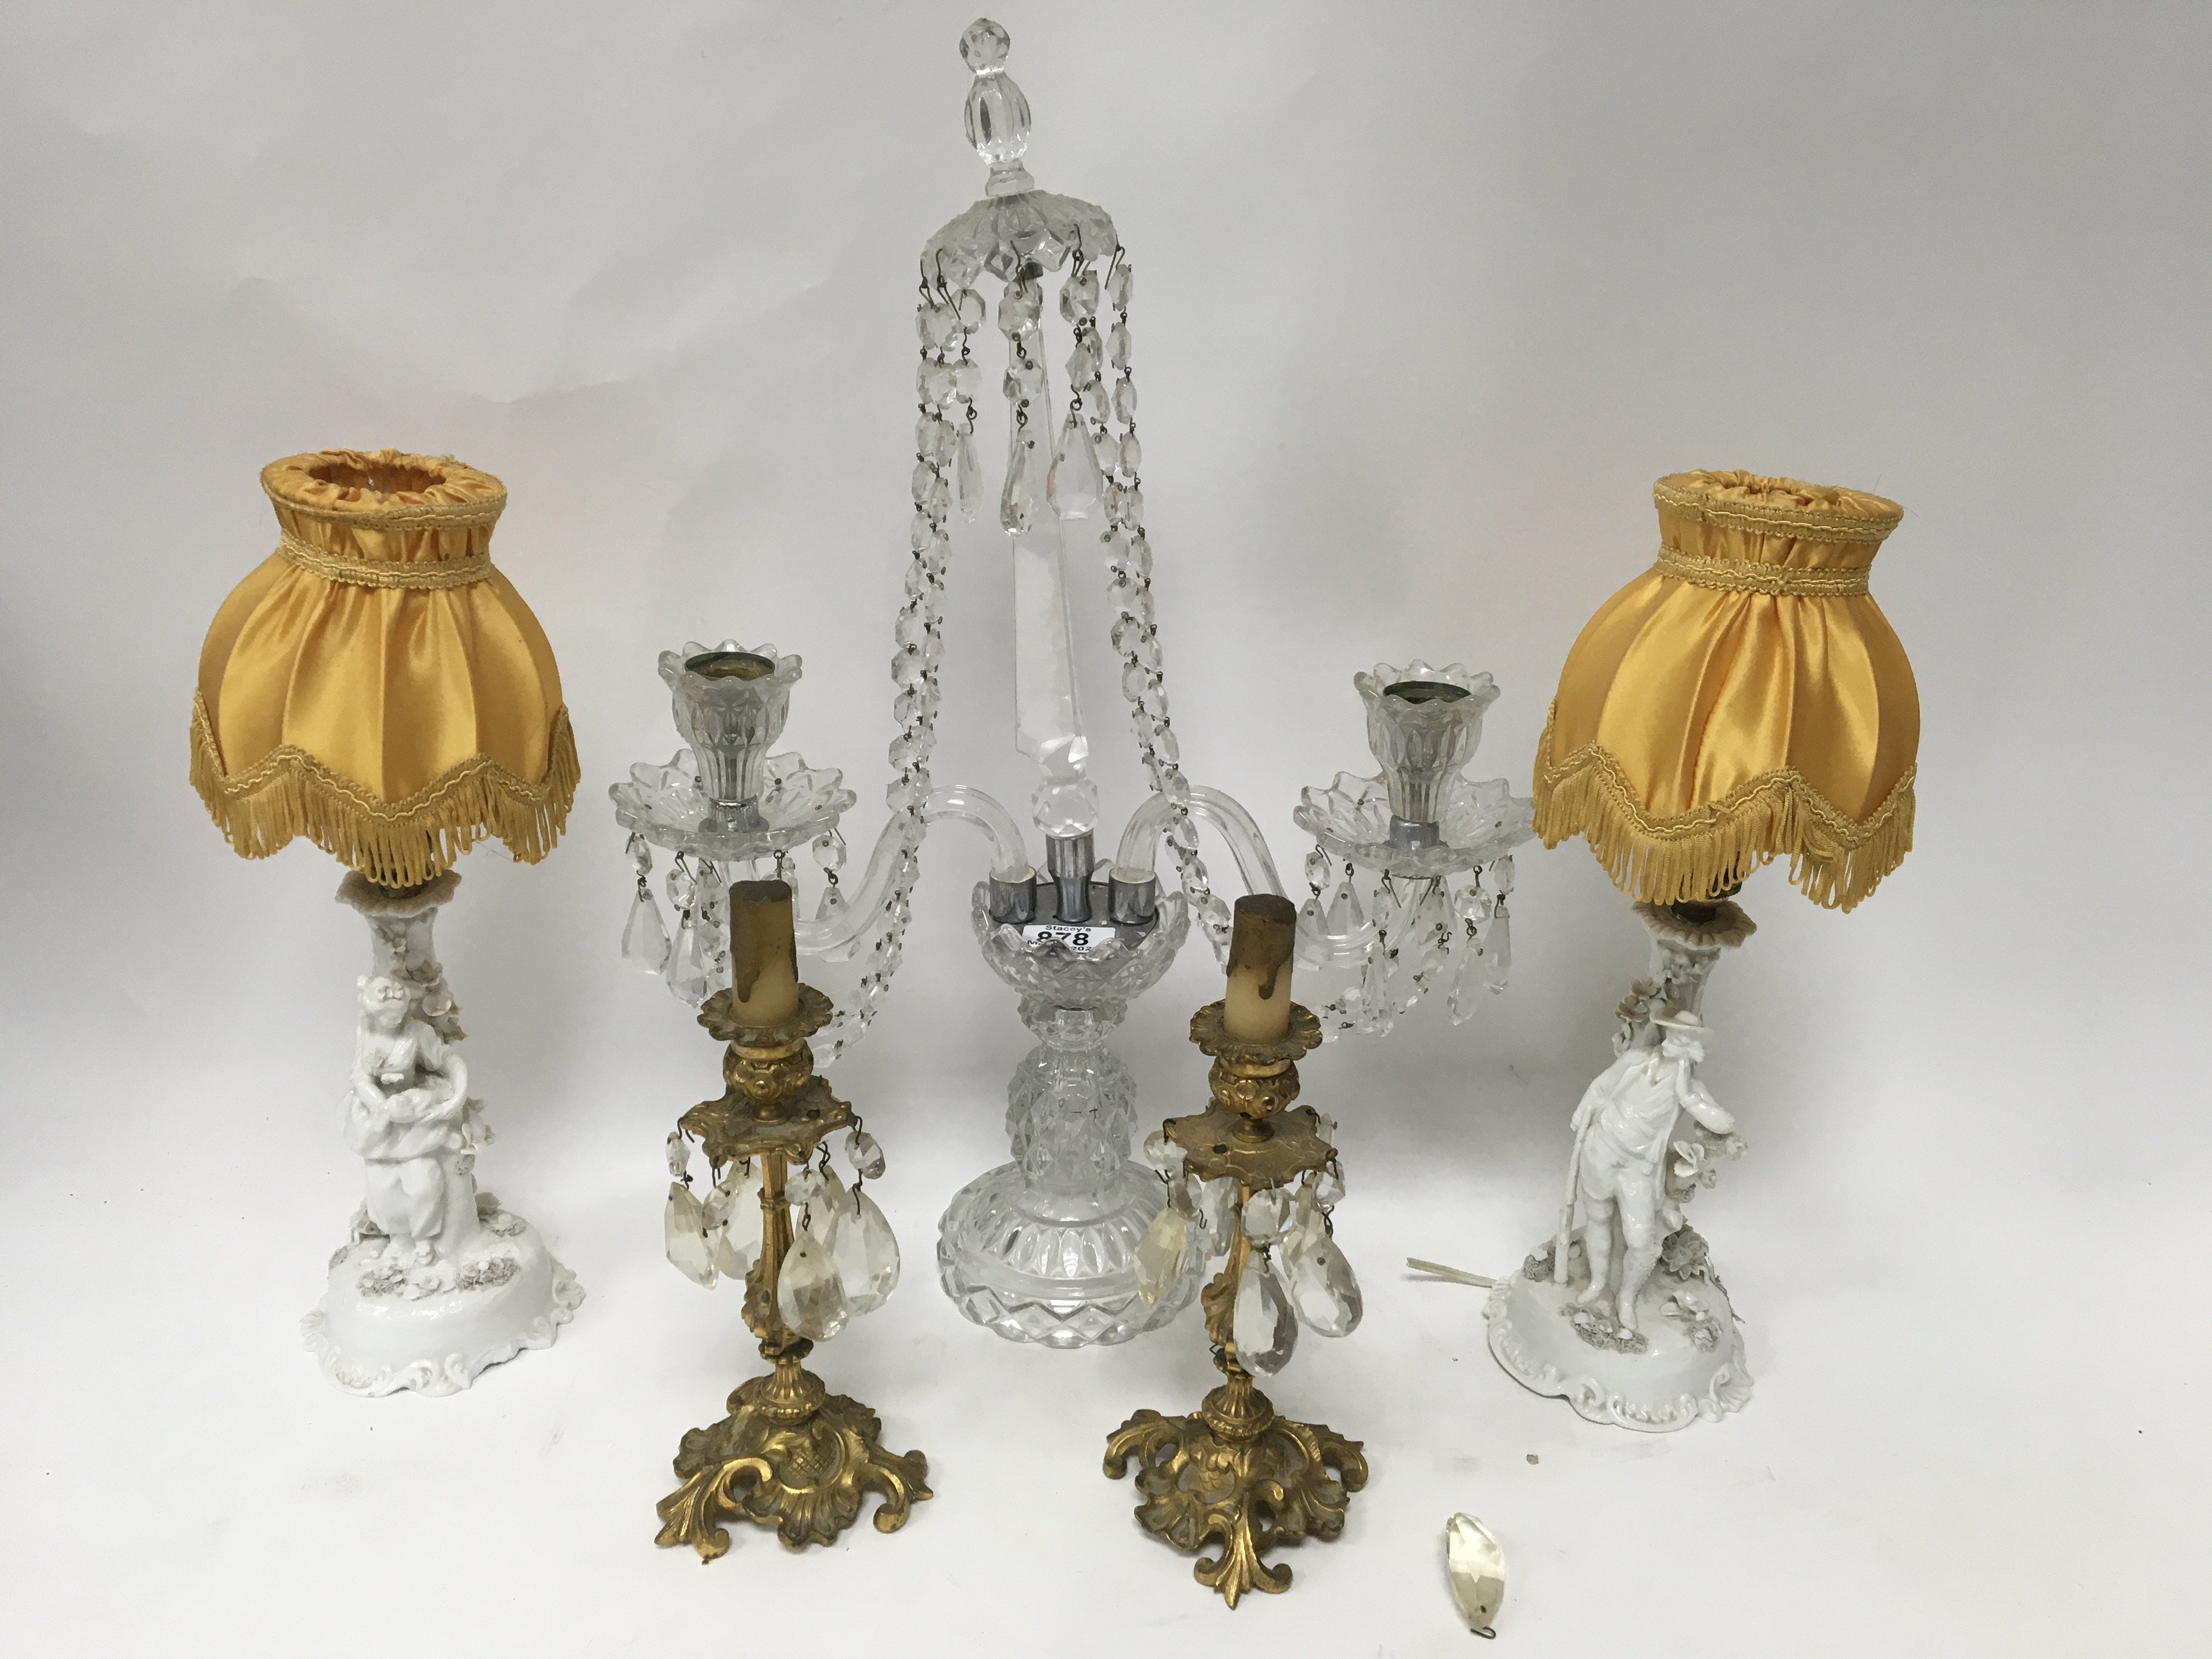 A pair of German White porcelain figural lamps, a pair of gilt brass candlesticks and a glass